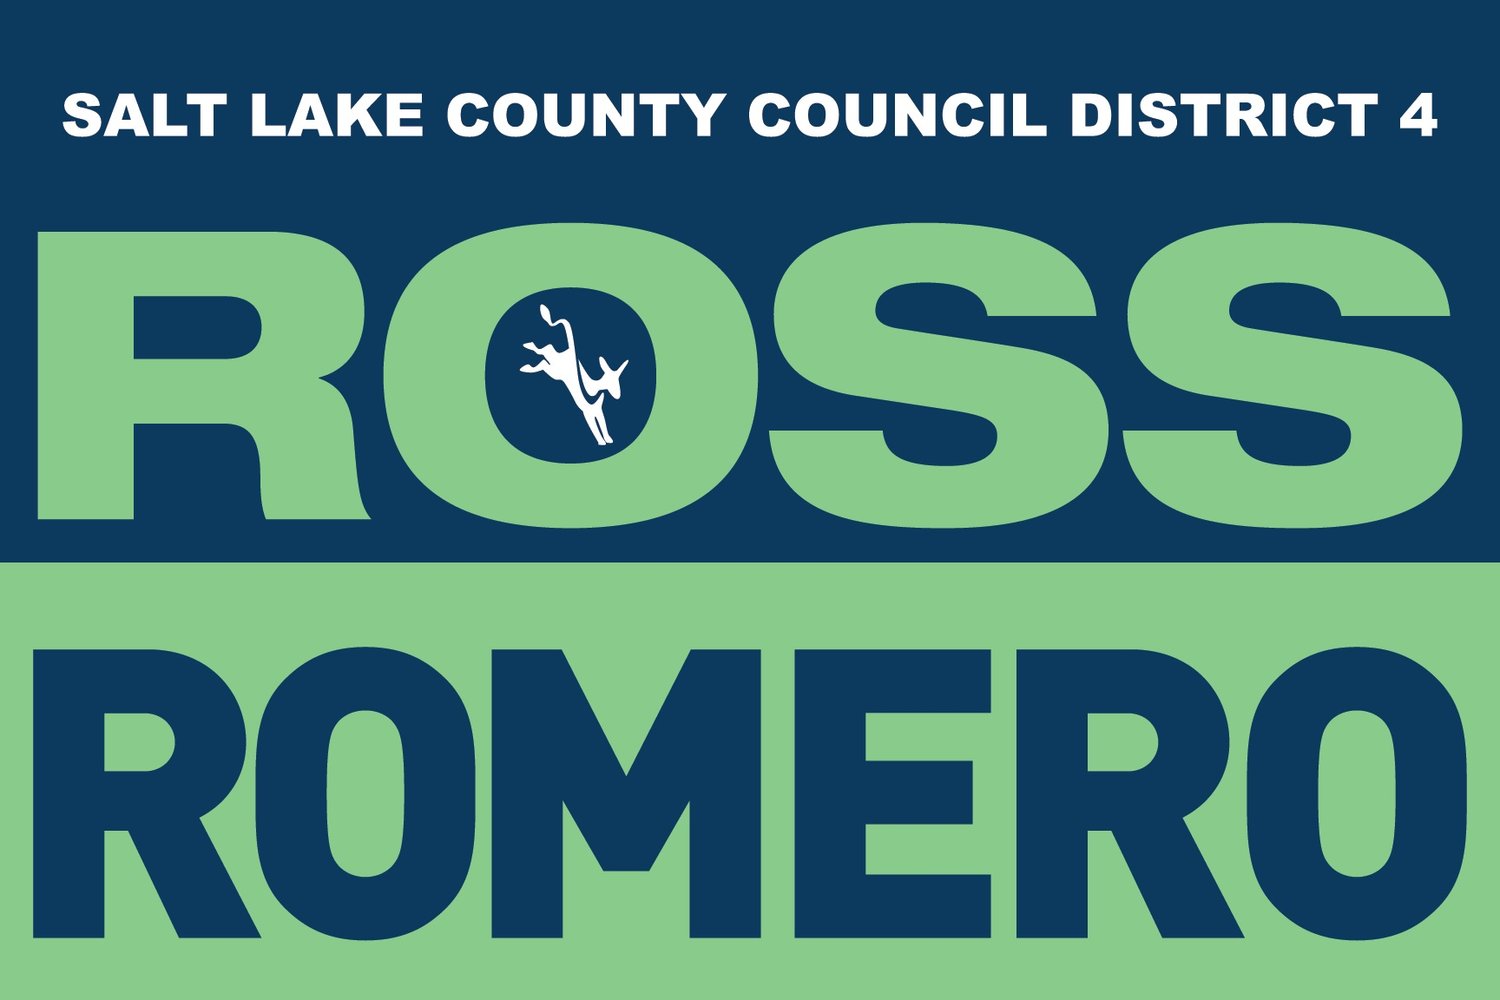 Ross Romero for Council District 4